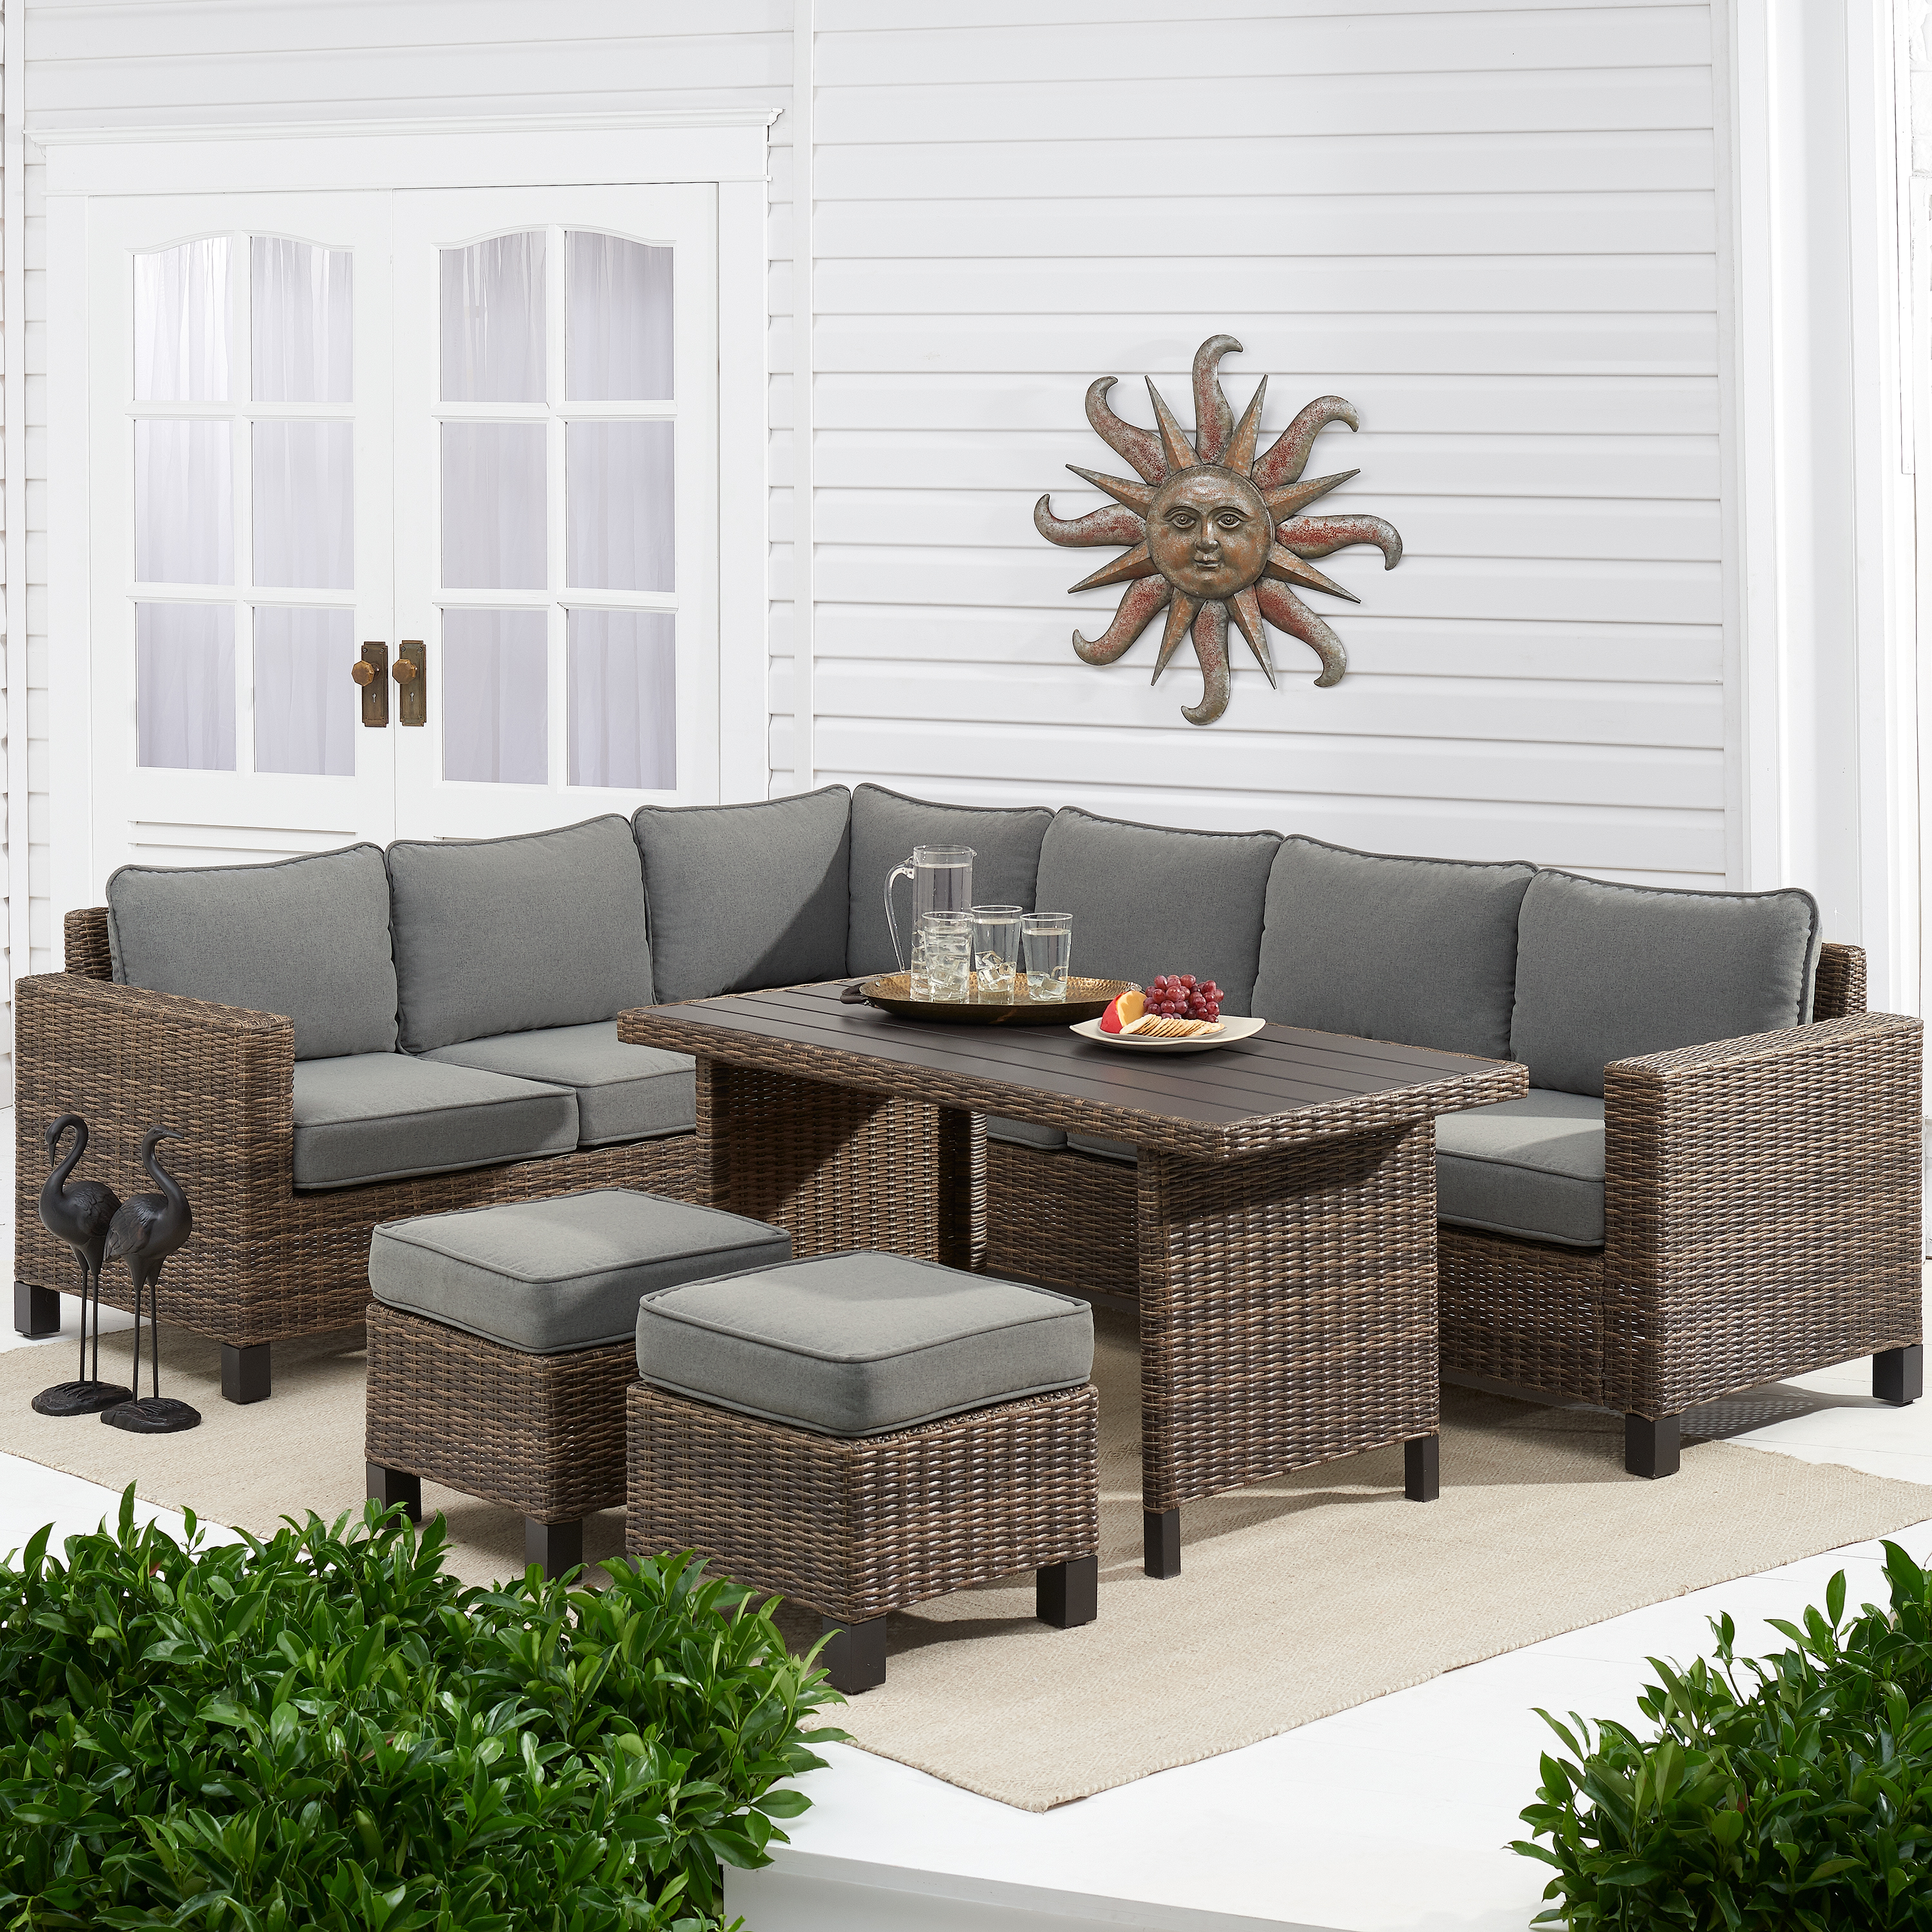 Better Homes Gardens Brookbury 5 Piece Patio Wicker Sectional Set With Gray Cushions Walmart throughout proportions 3000 X 3000